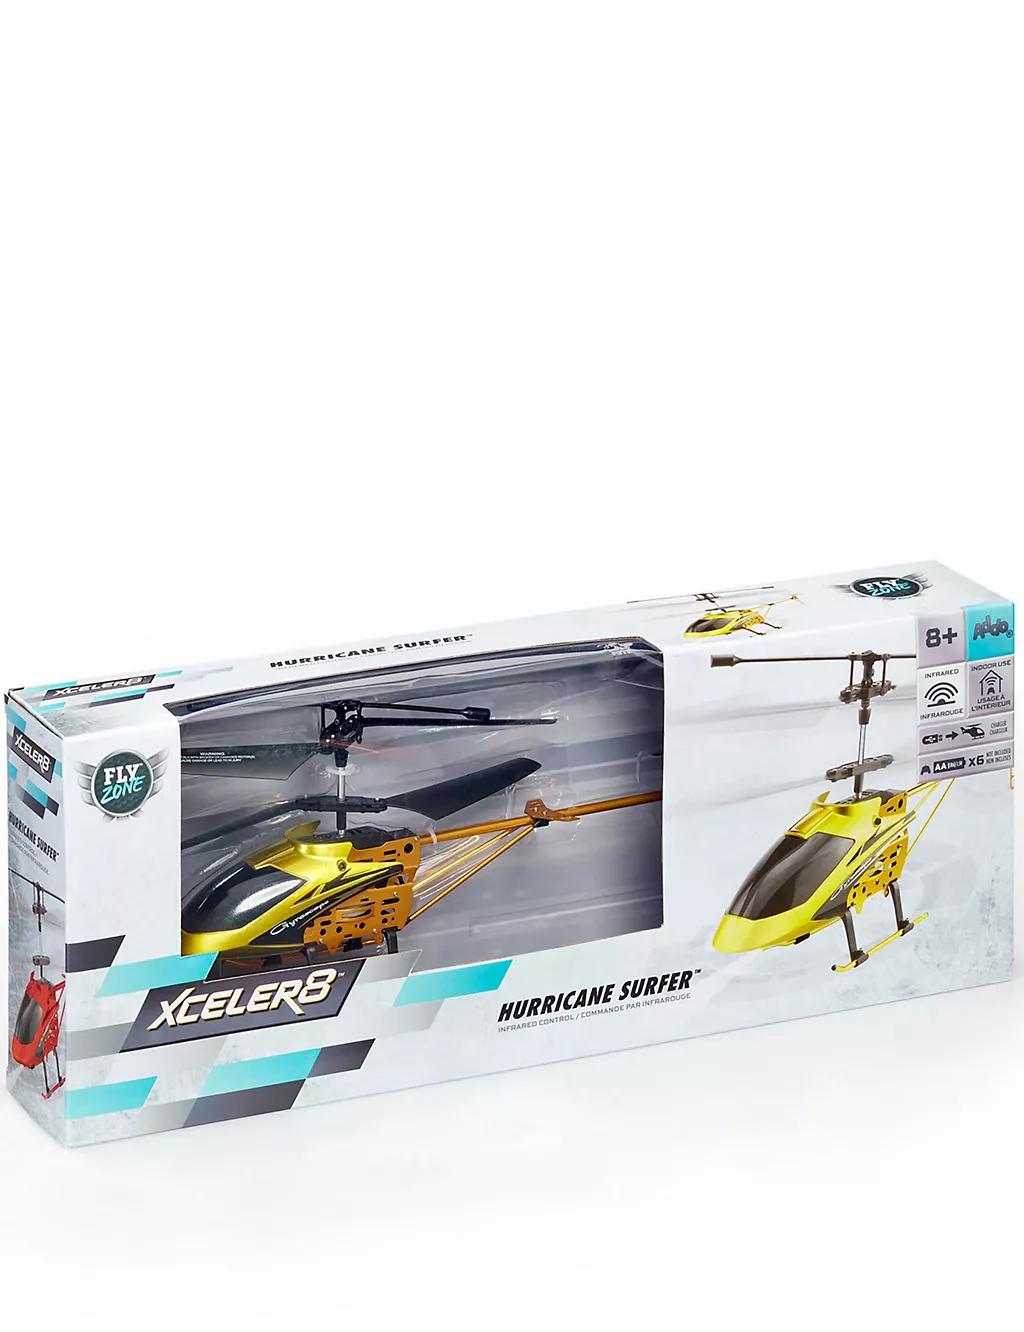 Hurricane Rc Helicopter: Expert comparisons and reviews of the hurricane rc helicopter